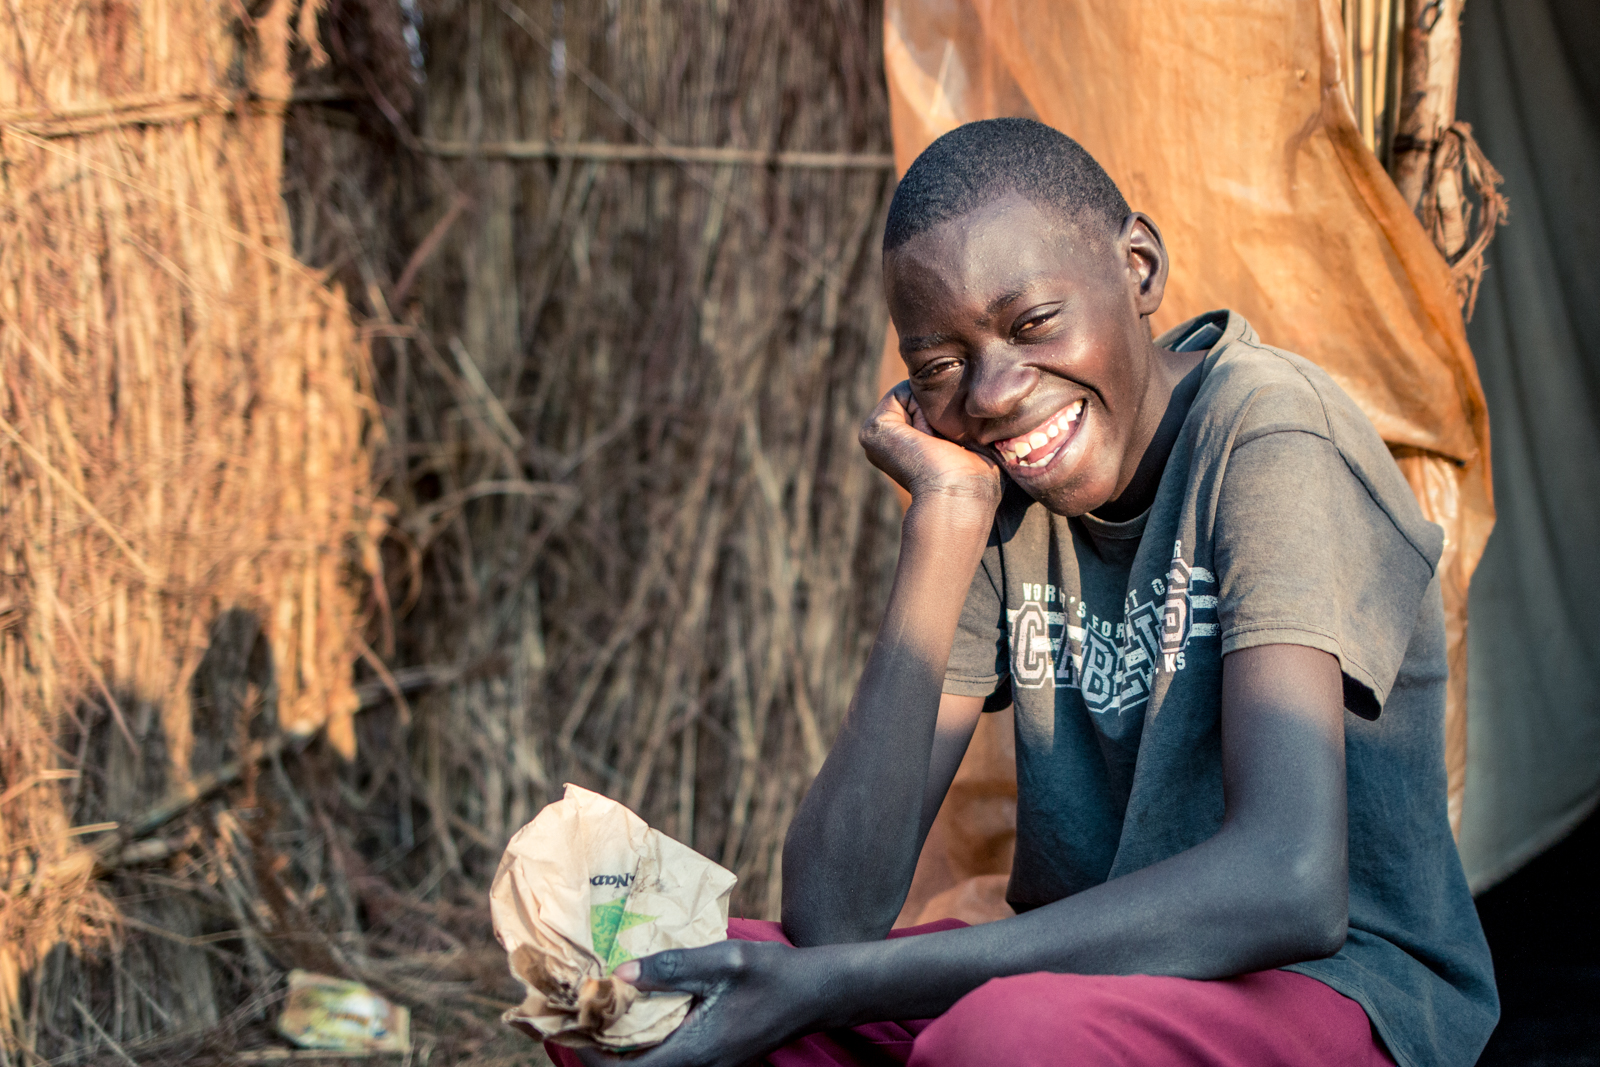  ZIMBABWE: [Home Visit] Eddy is Patricia's 21 year old son. 5 years ago, at 16, he was still yet to attend school, walk and talk because of his condition and weighed less than 60 lbs. Through the food and assistance Patricia received Eddy has rapidly